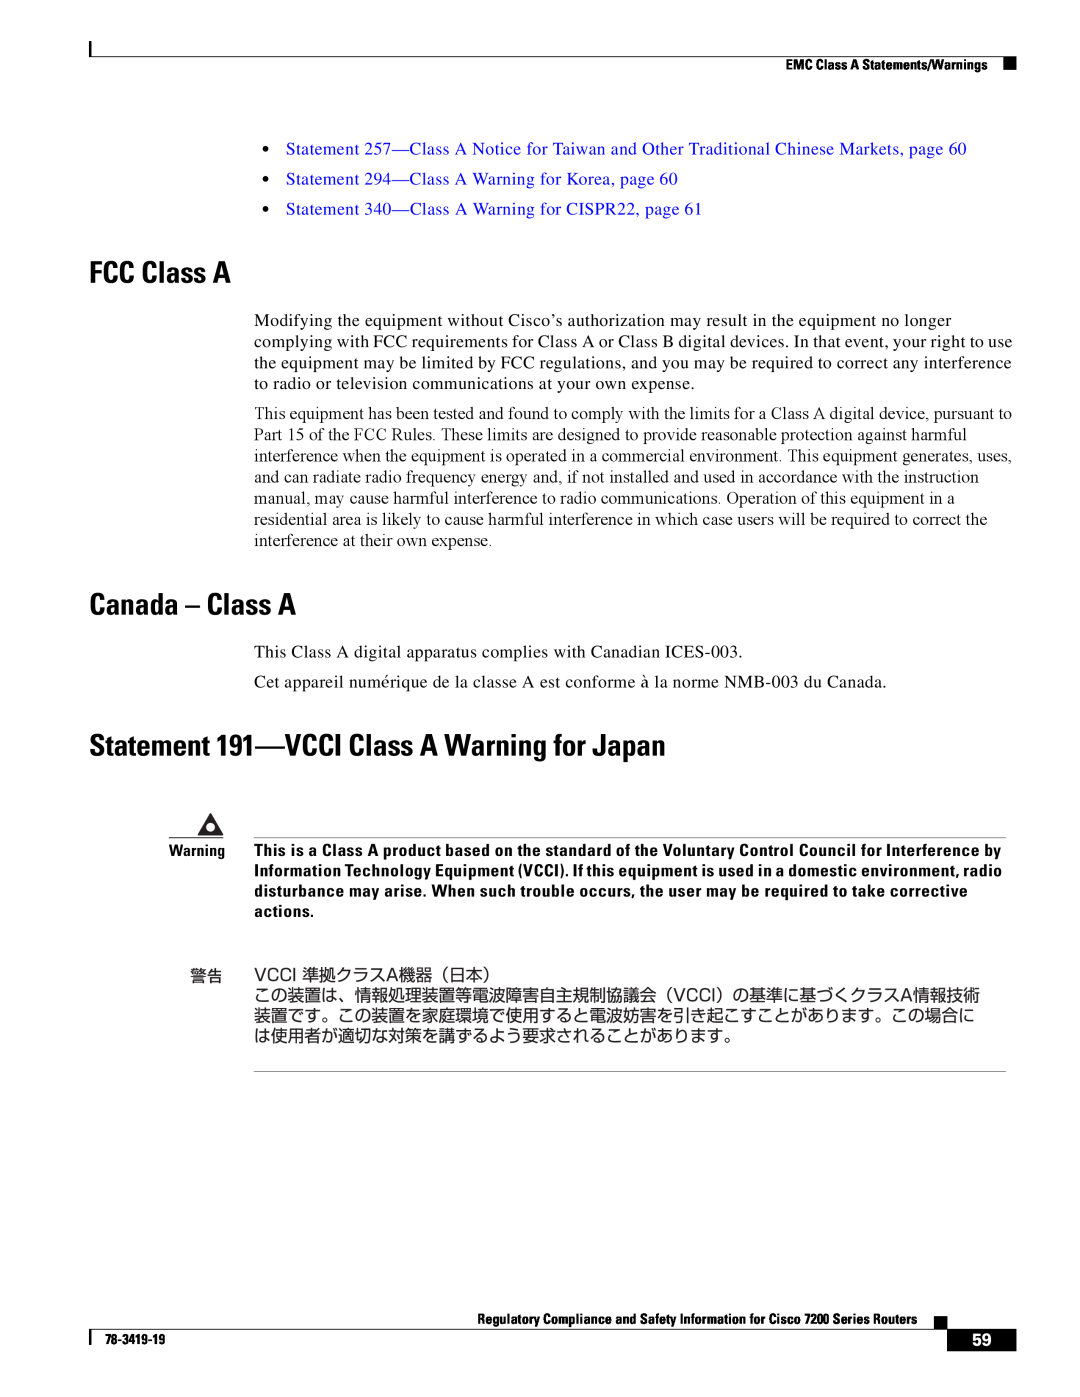 Cisco Systems 7202, 7206 VXR, 7200 Series manual FCC Class A, Canada - Class A, Statement 191-VCCI Class A Warning for Japan 